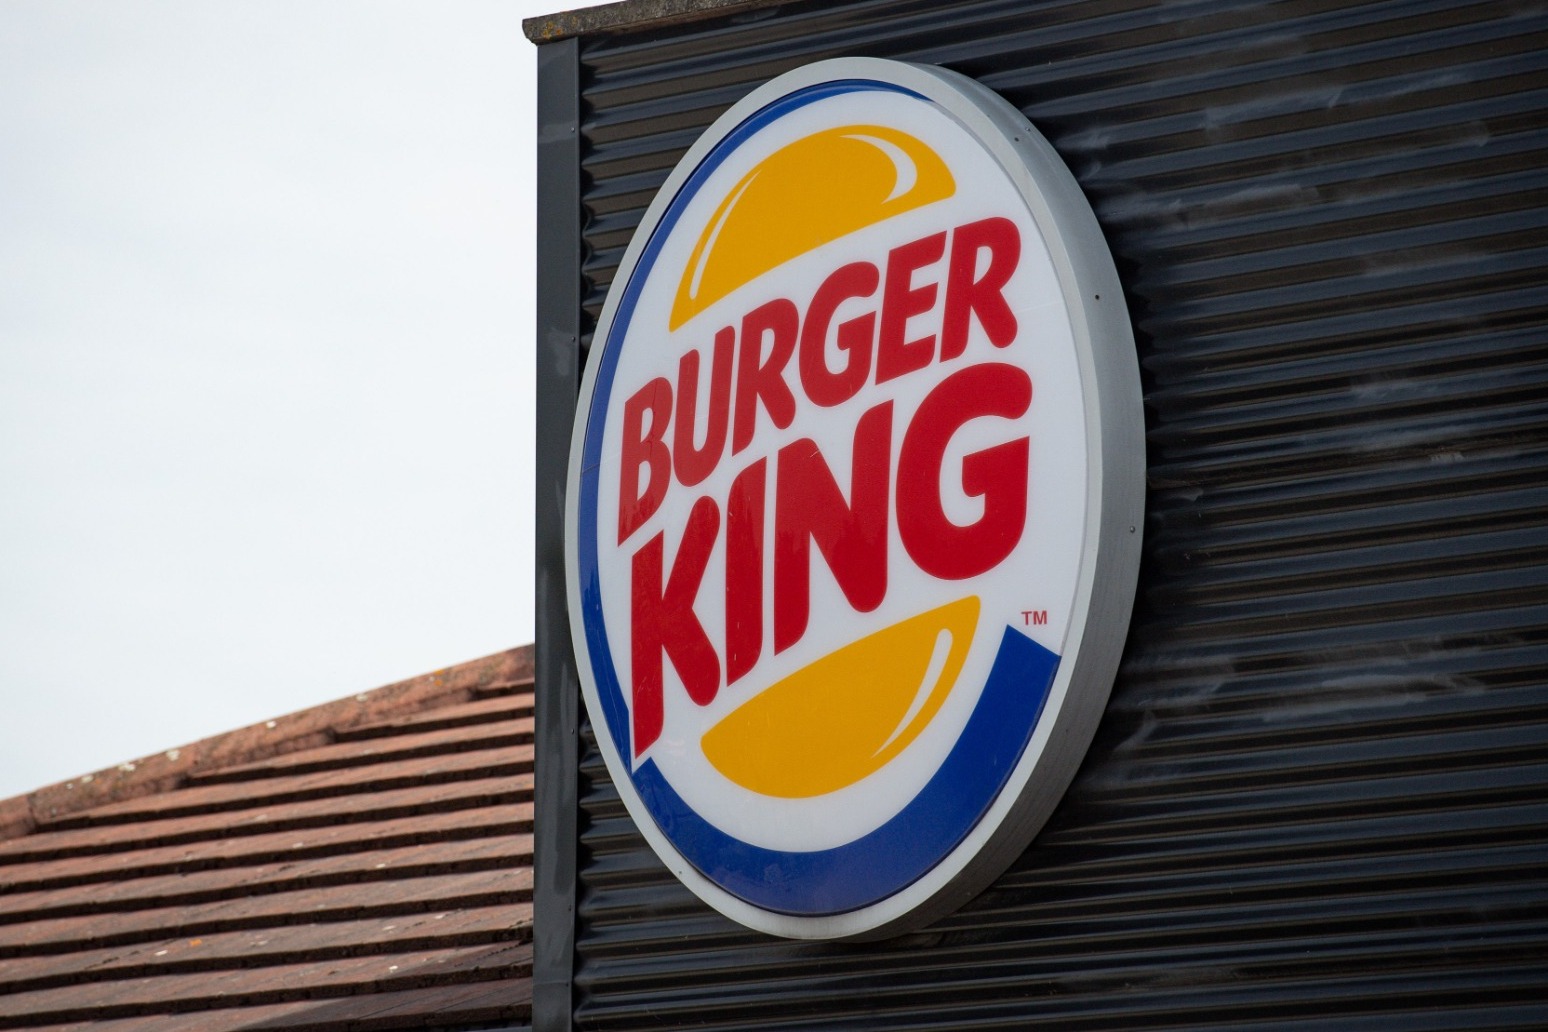 Burger King rapped by ad watchdog for plant-based burger claims 